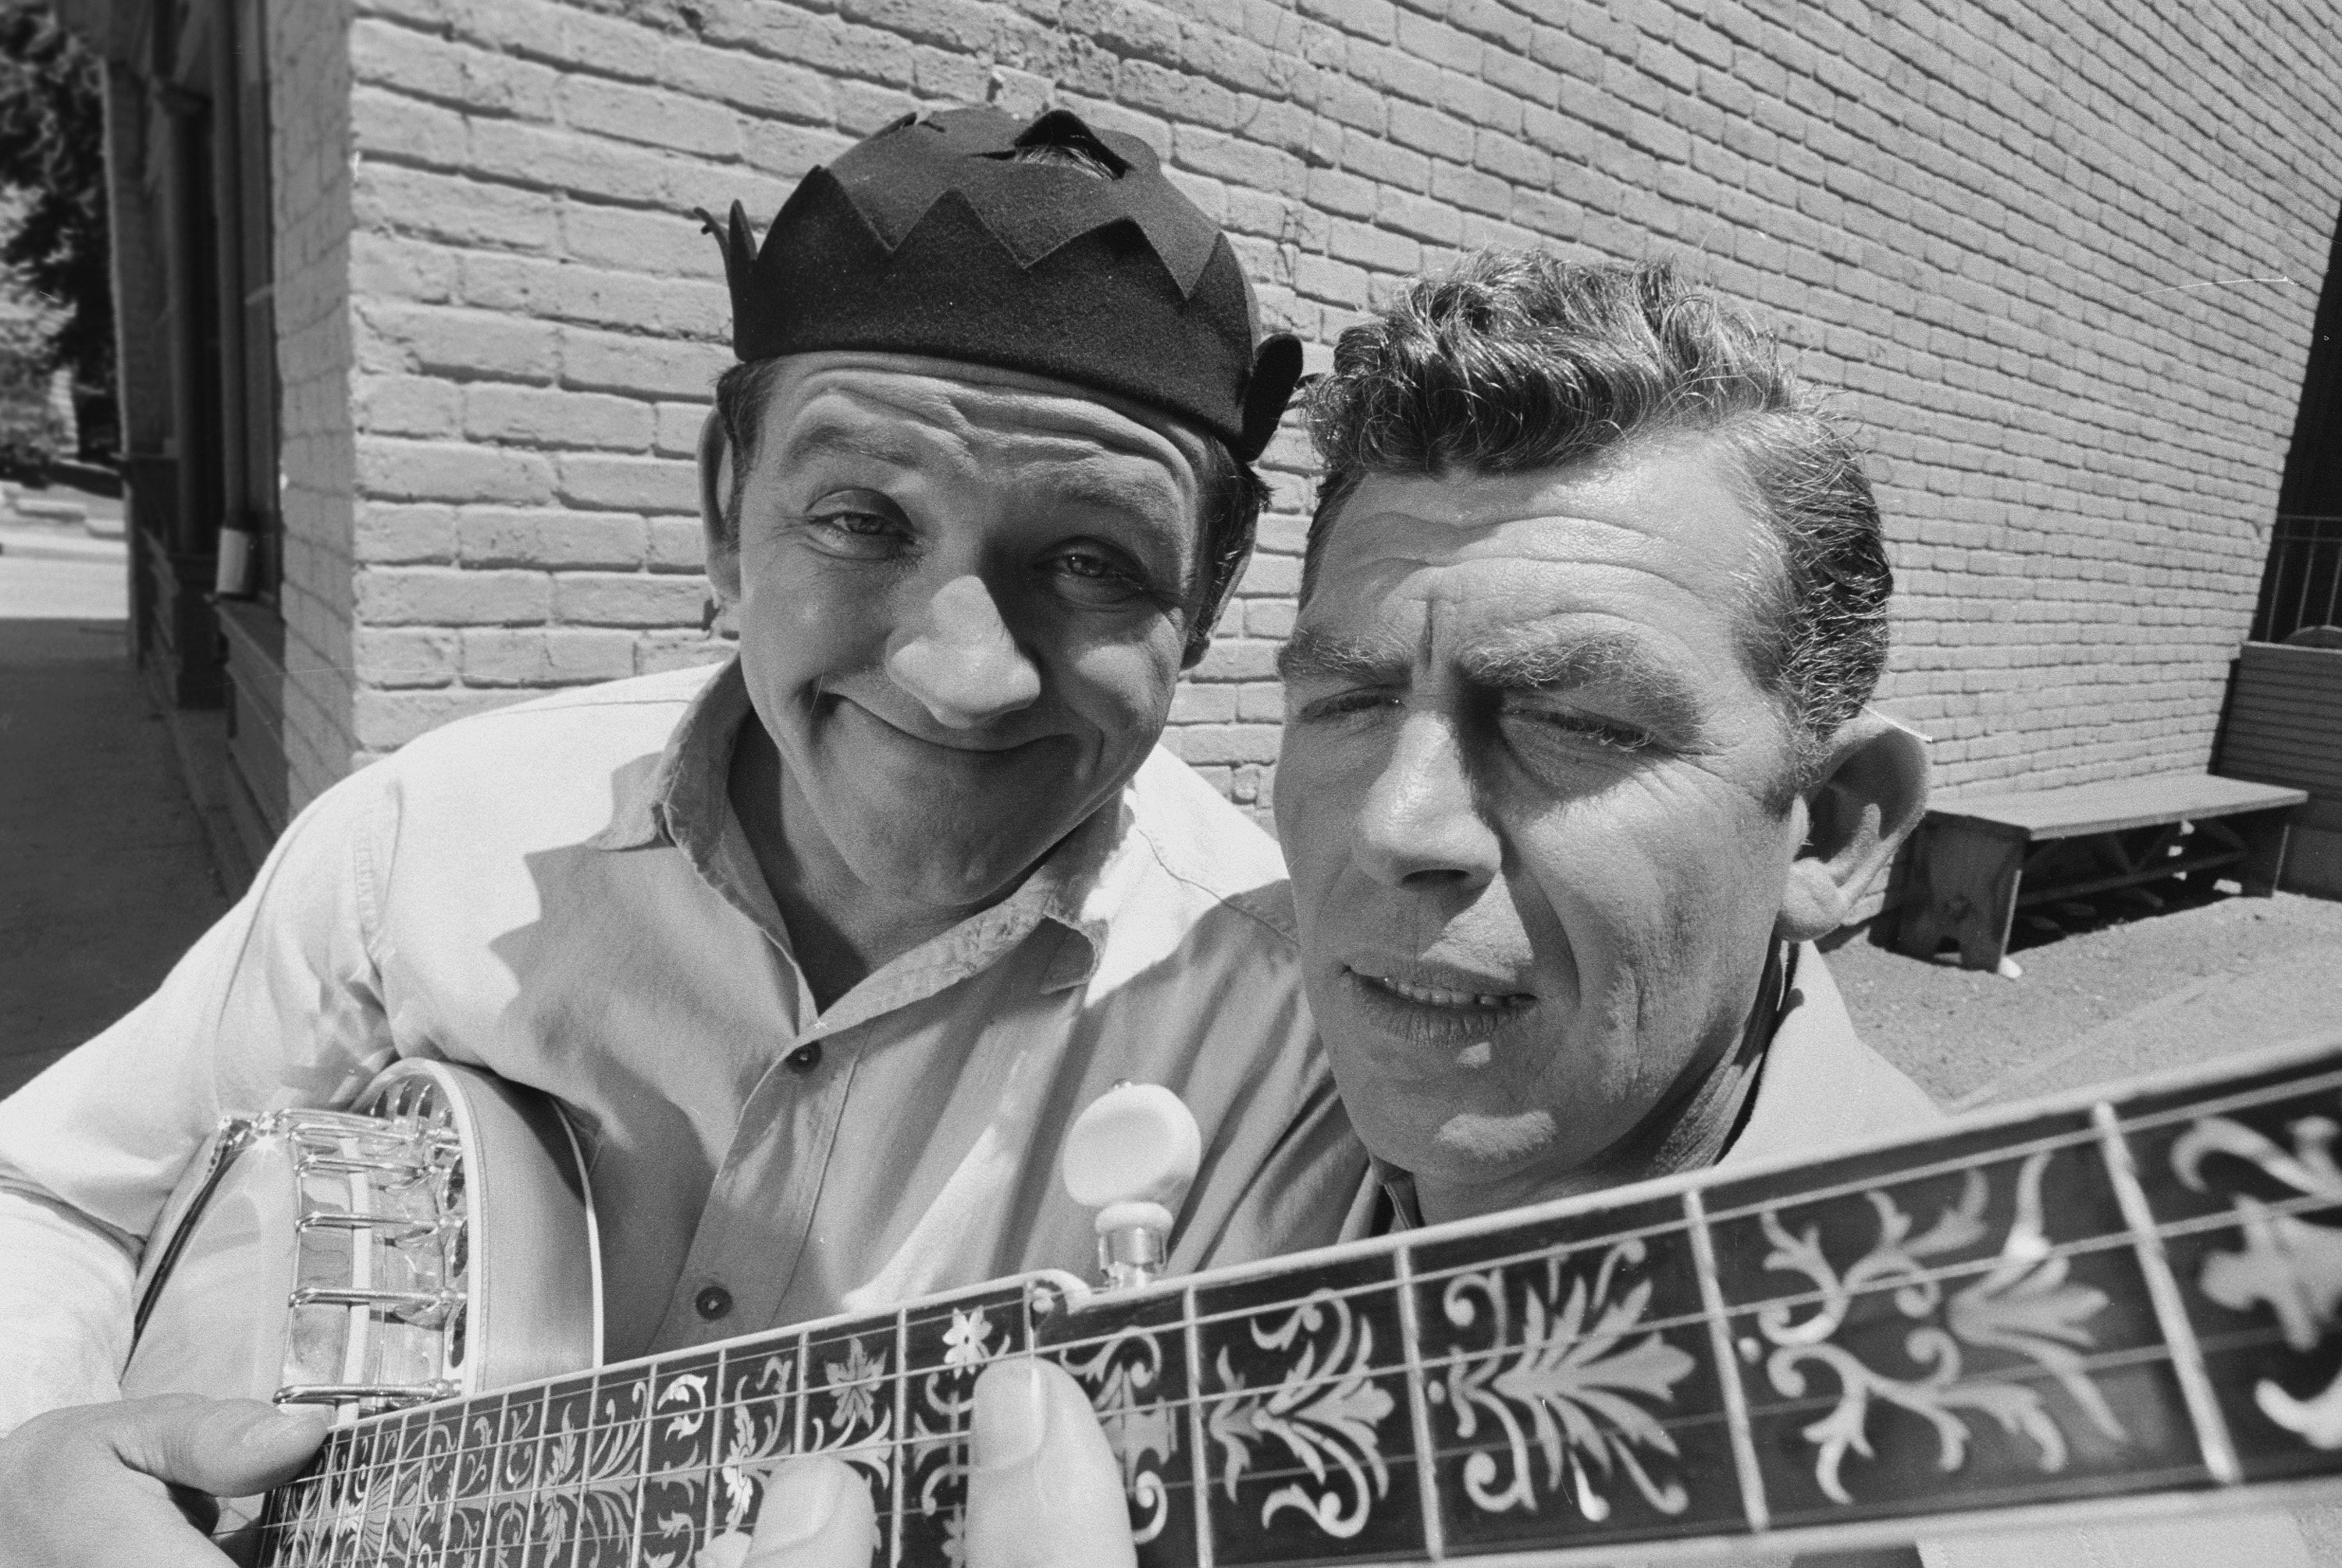 Actors George Lindsey as Goober Pyle and Andy Griffith as Sheriff Andy Taylor in a photo from 'The Andy Griffith Show'